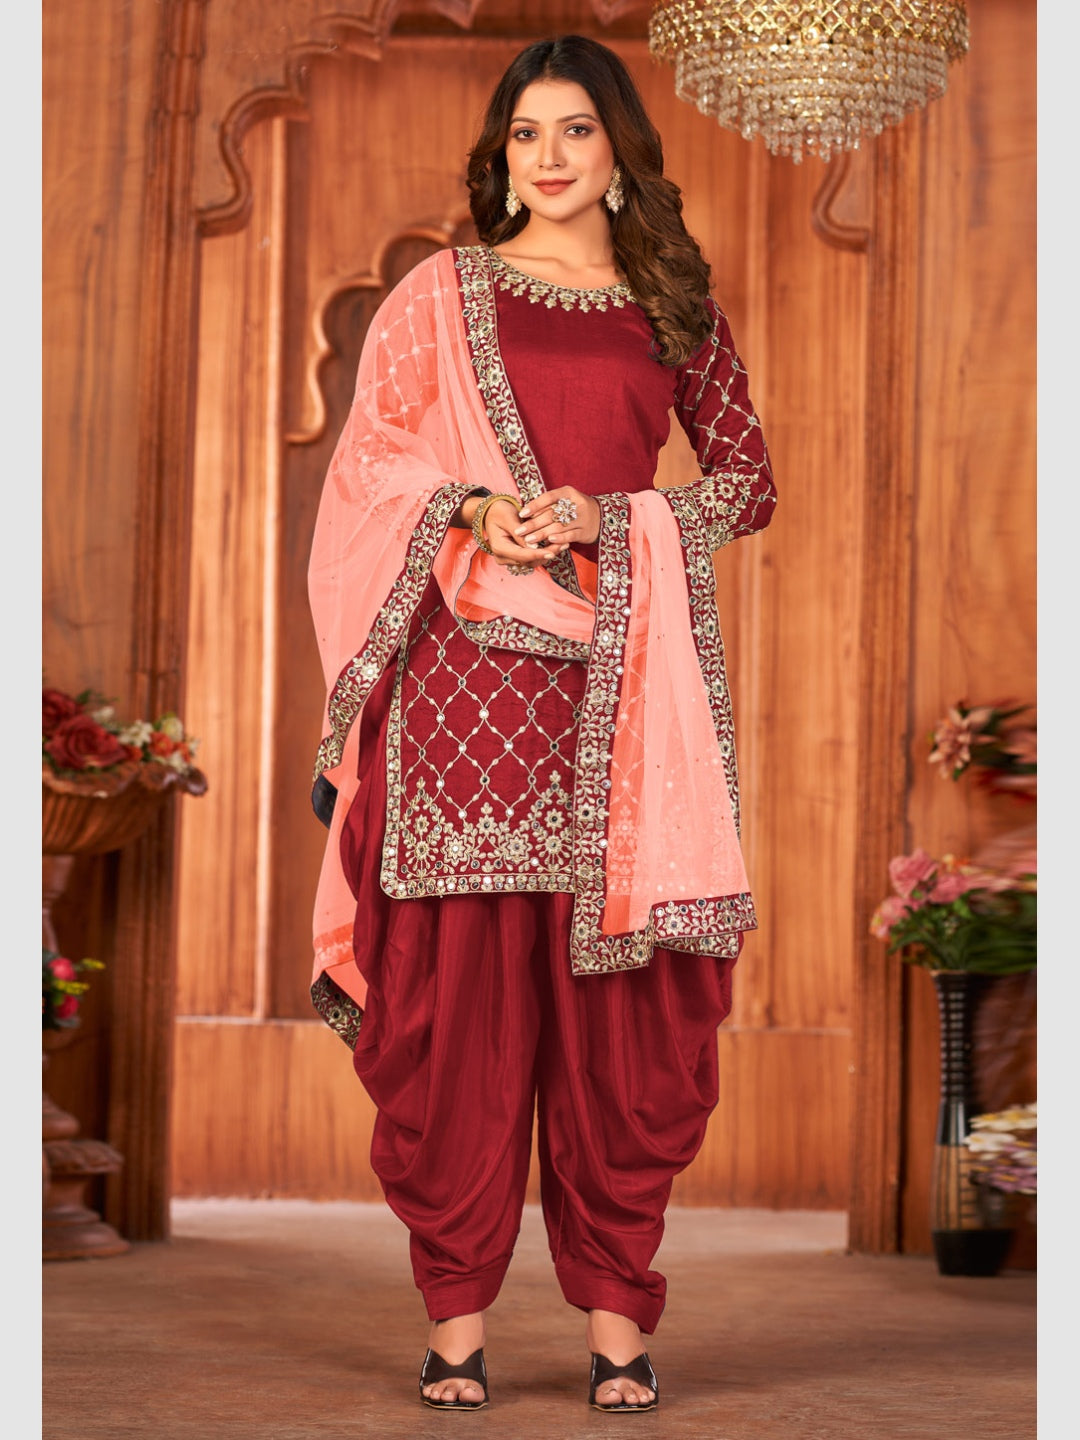 Pakistani Suits - Buy Pakistani Suits Online Starting at Just ₹431 | Meesho